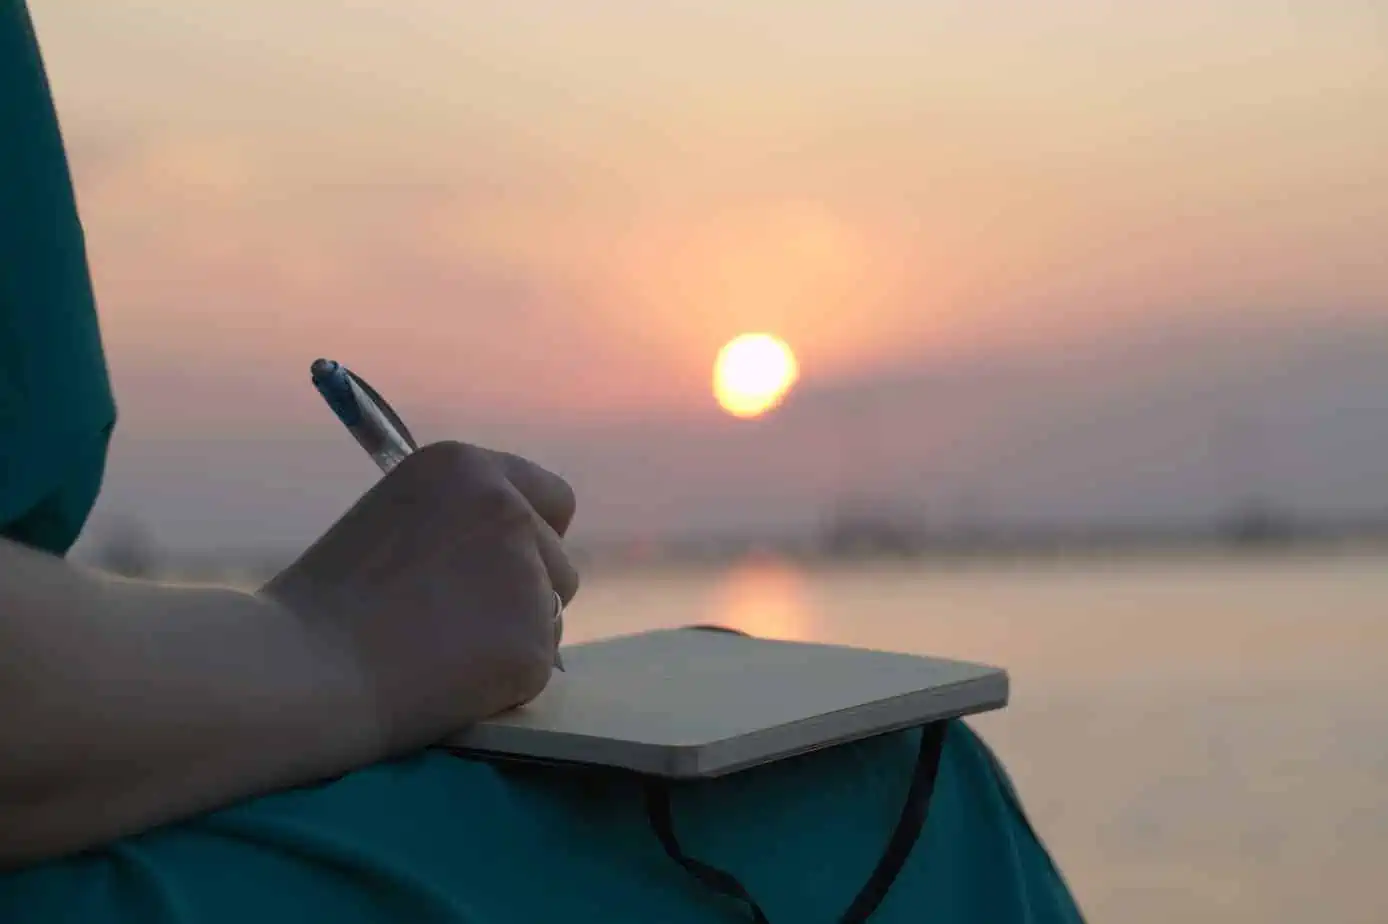 A person writing on a notebook in front of a sunset